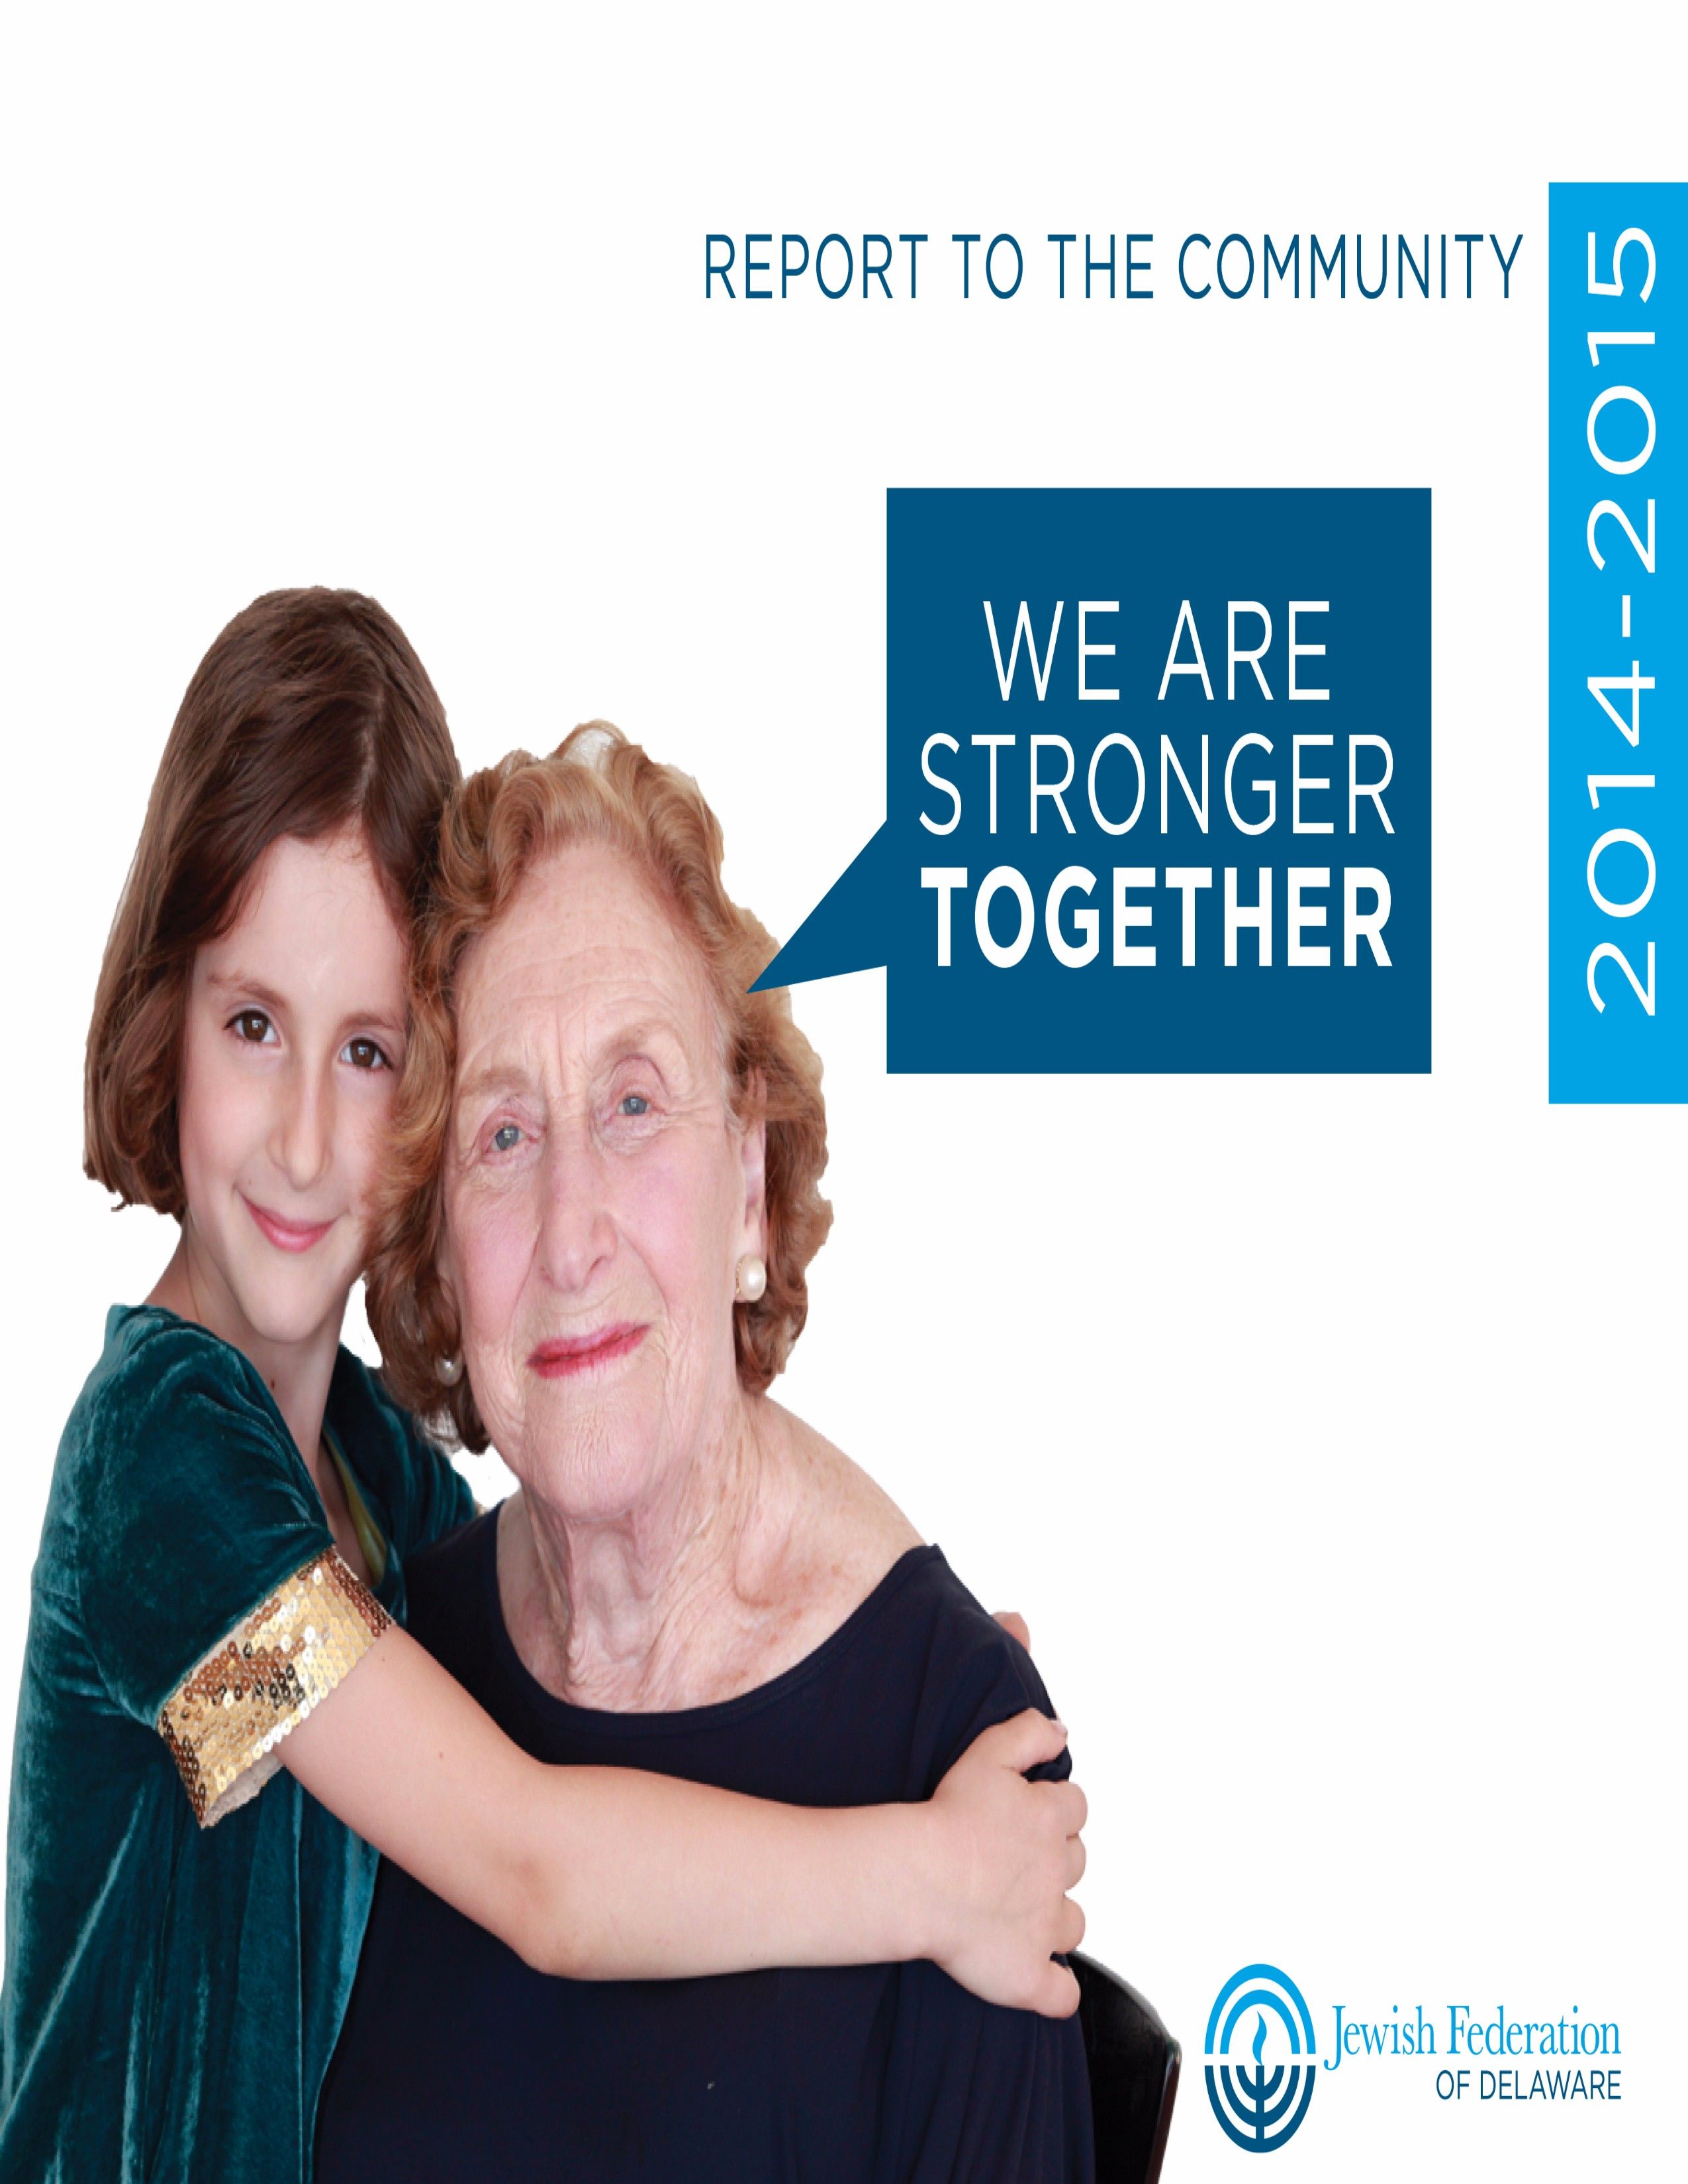 Click HERE to view the 2014-2015 Report to the Community